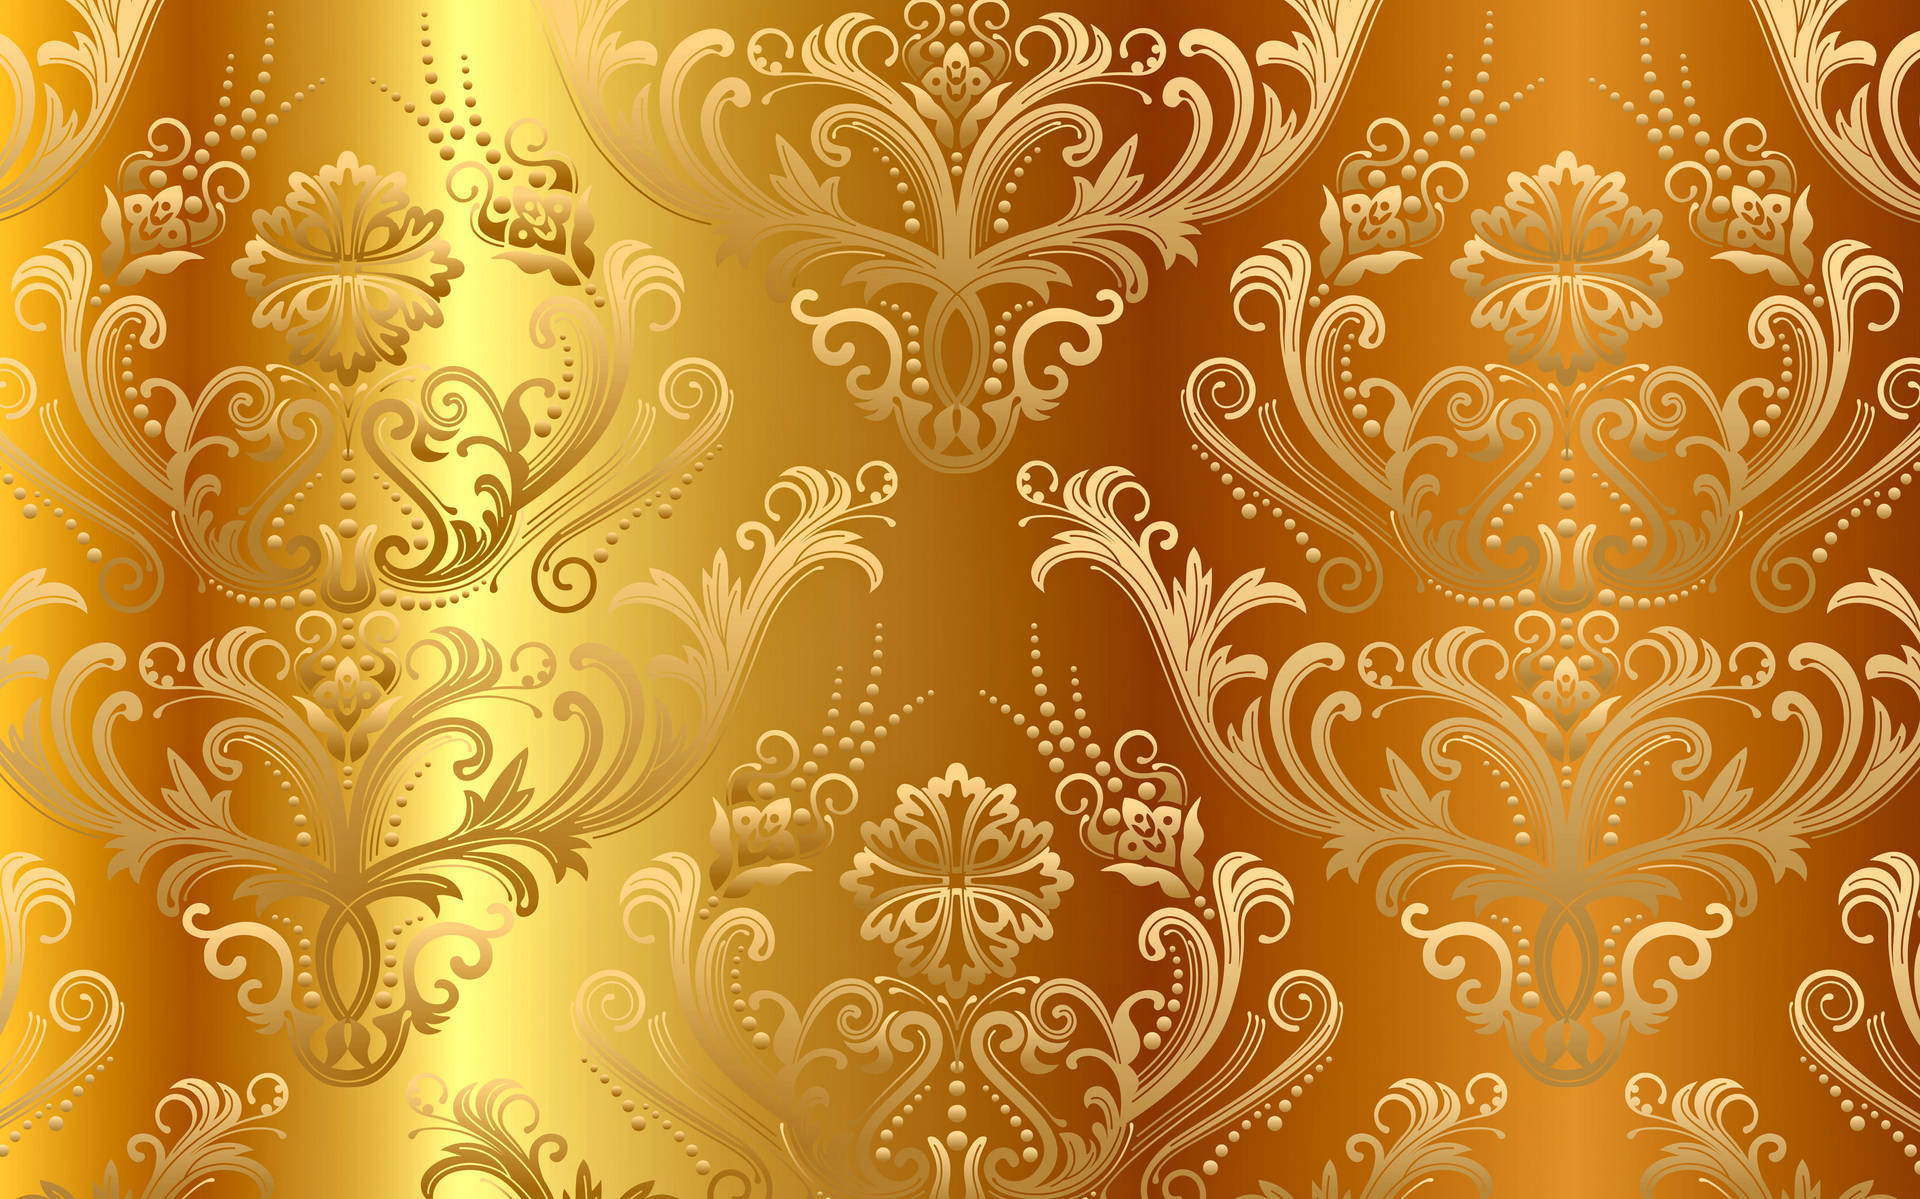 Background Design With Intricate Pattern Wallpaper